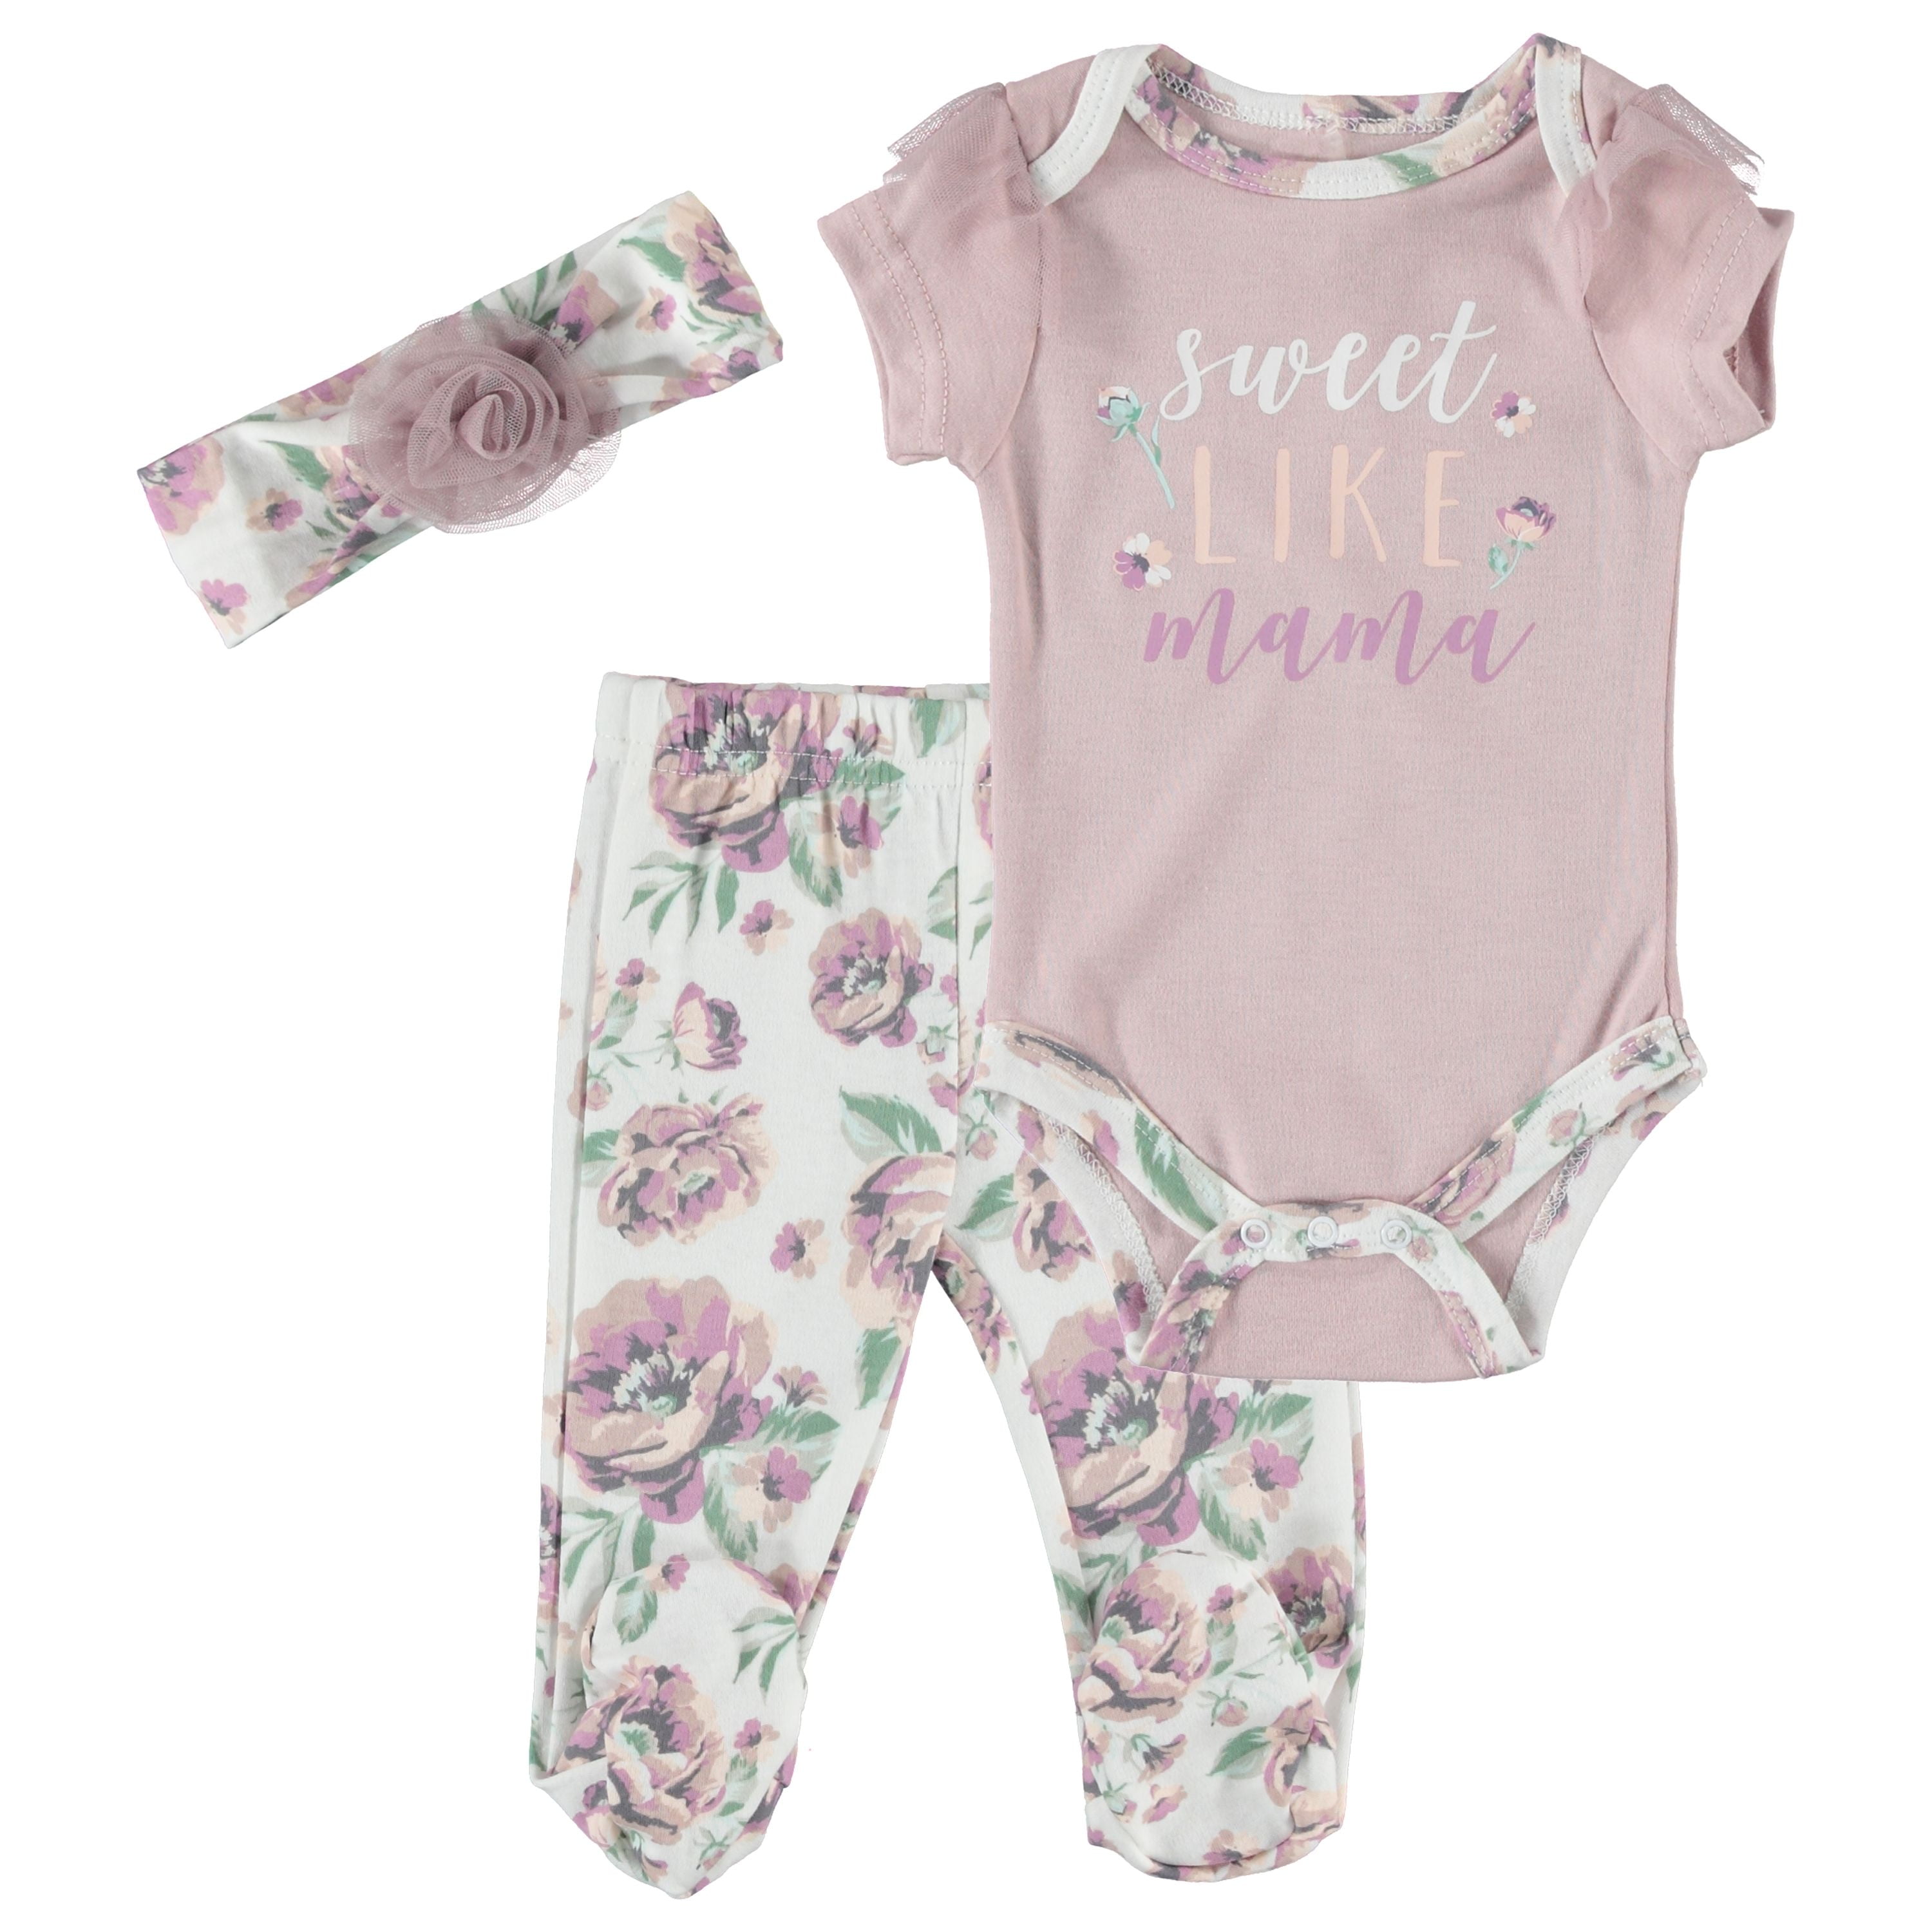 Kyle & Deena Baby Girl 3 PC Footed Pant Set, Sizes Newborn-9 Months ...